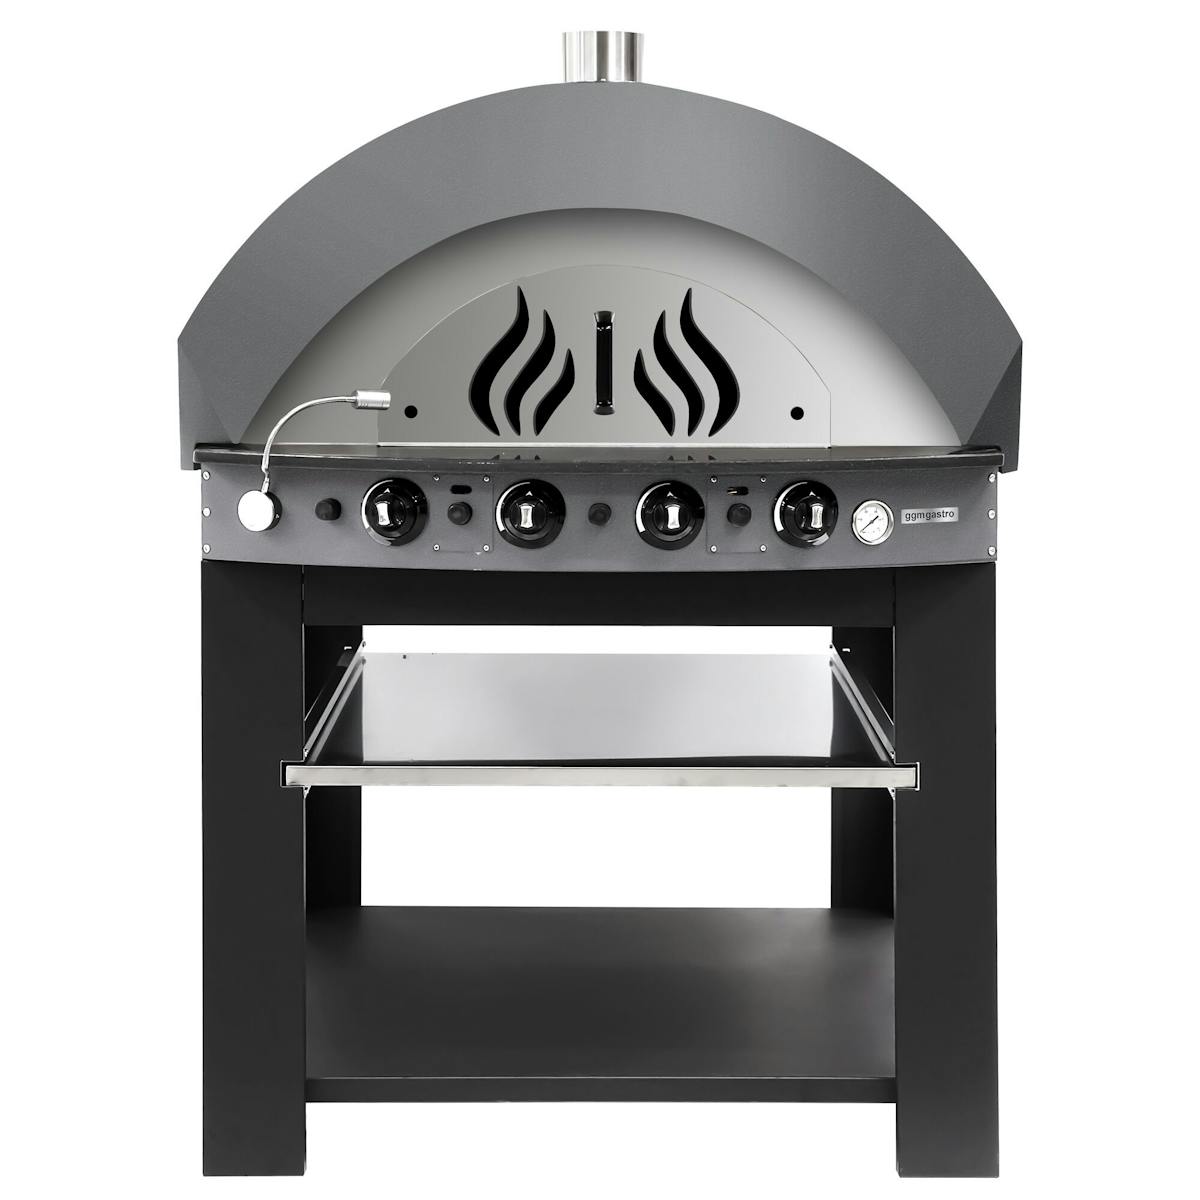 Gas pizza oven - anthracite - 9x 25cm - manual - incl. base frame